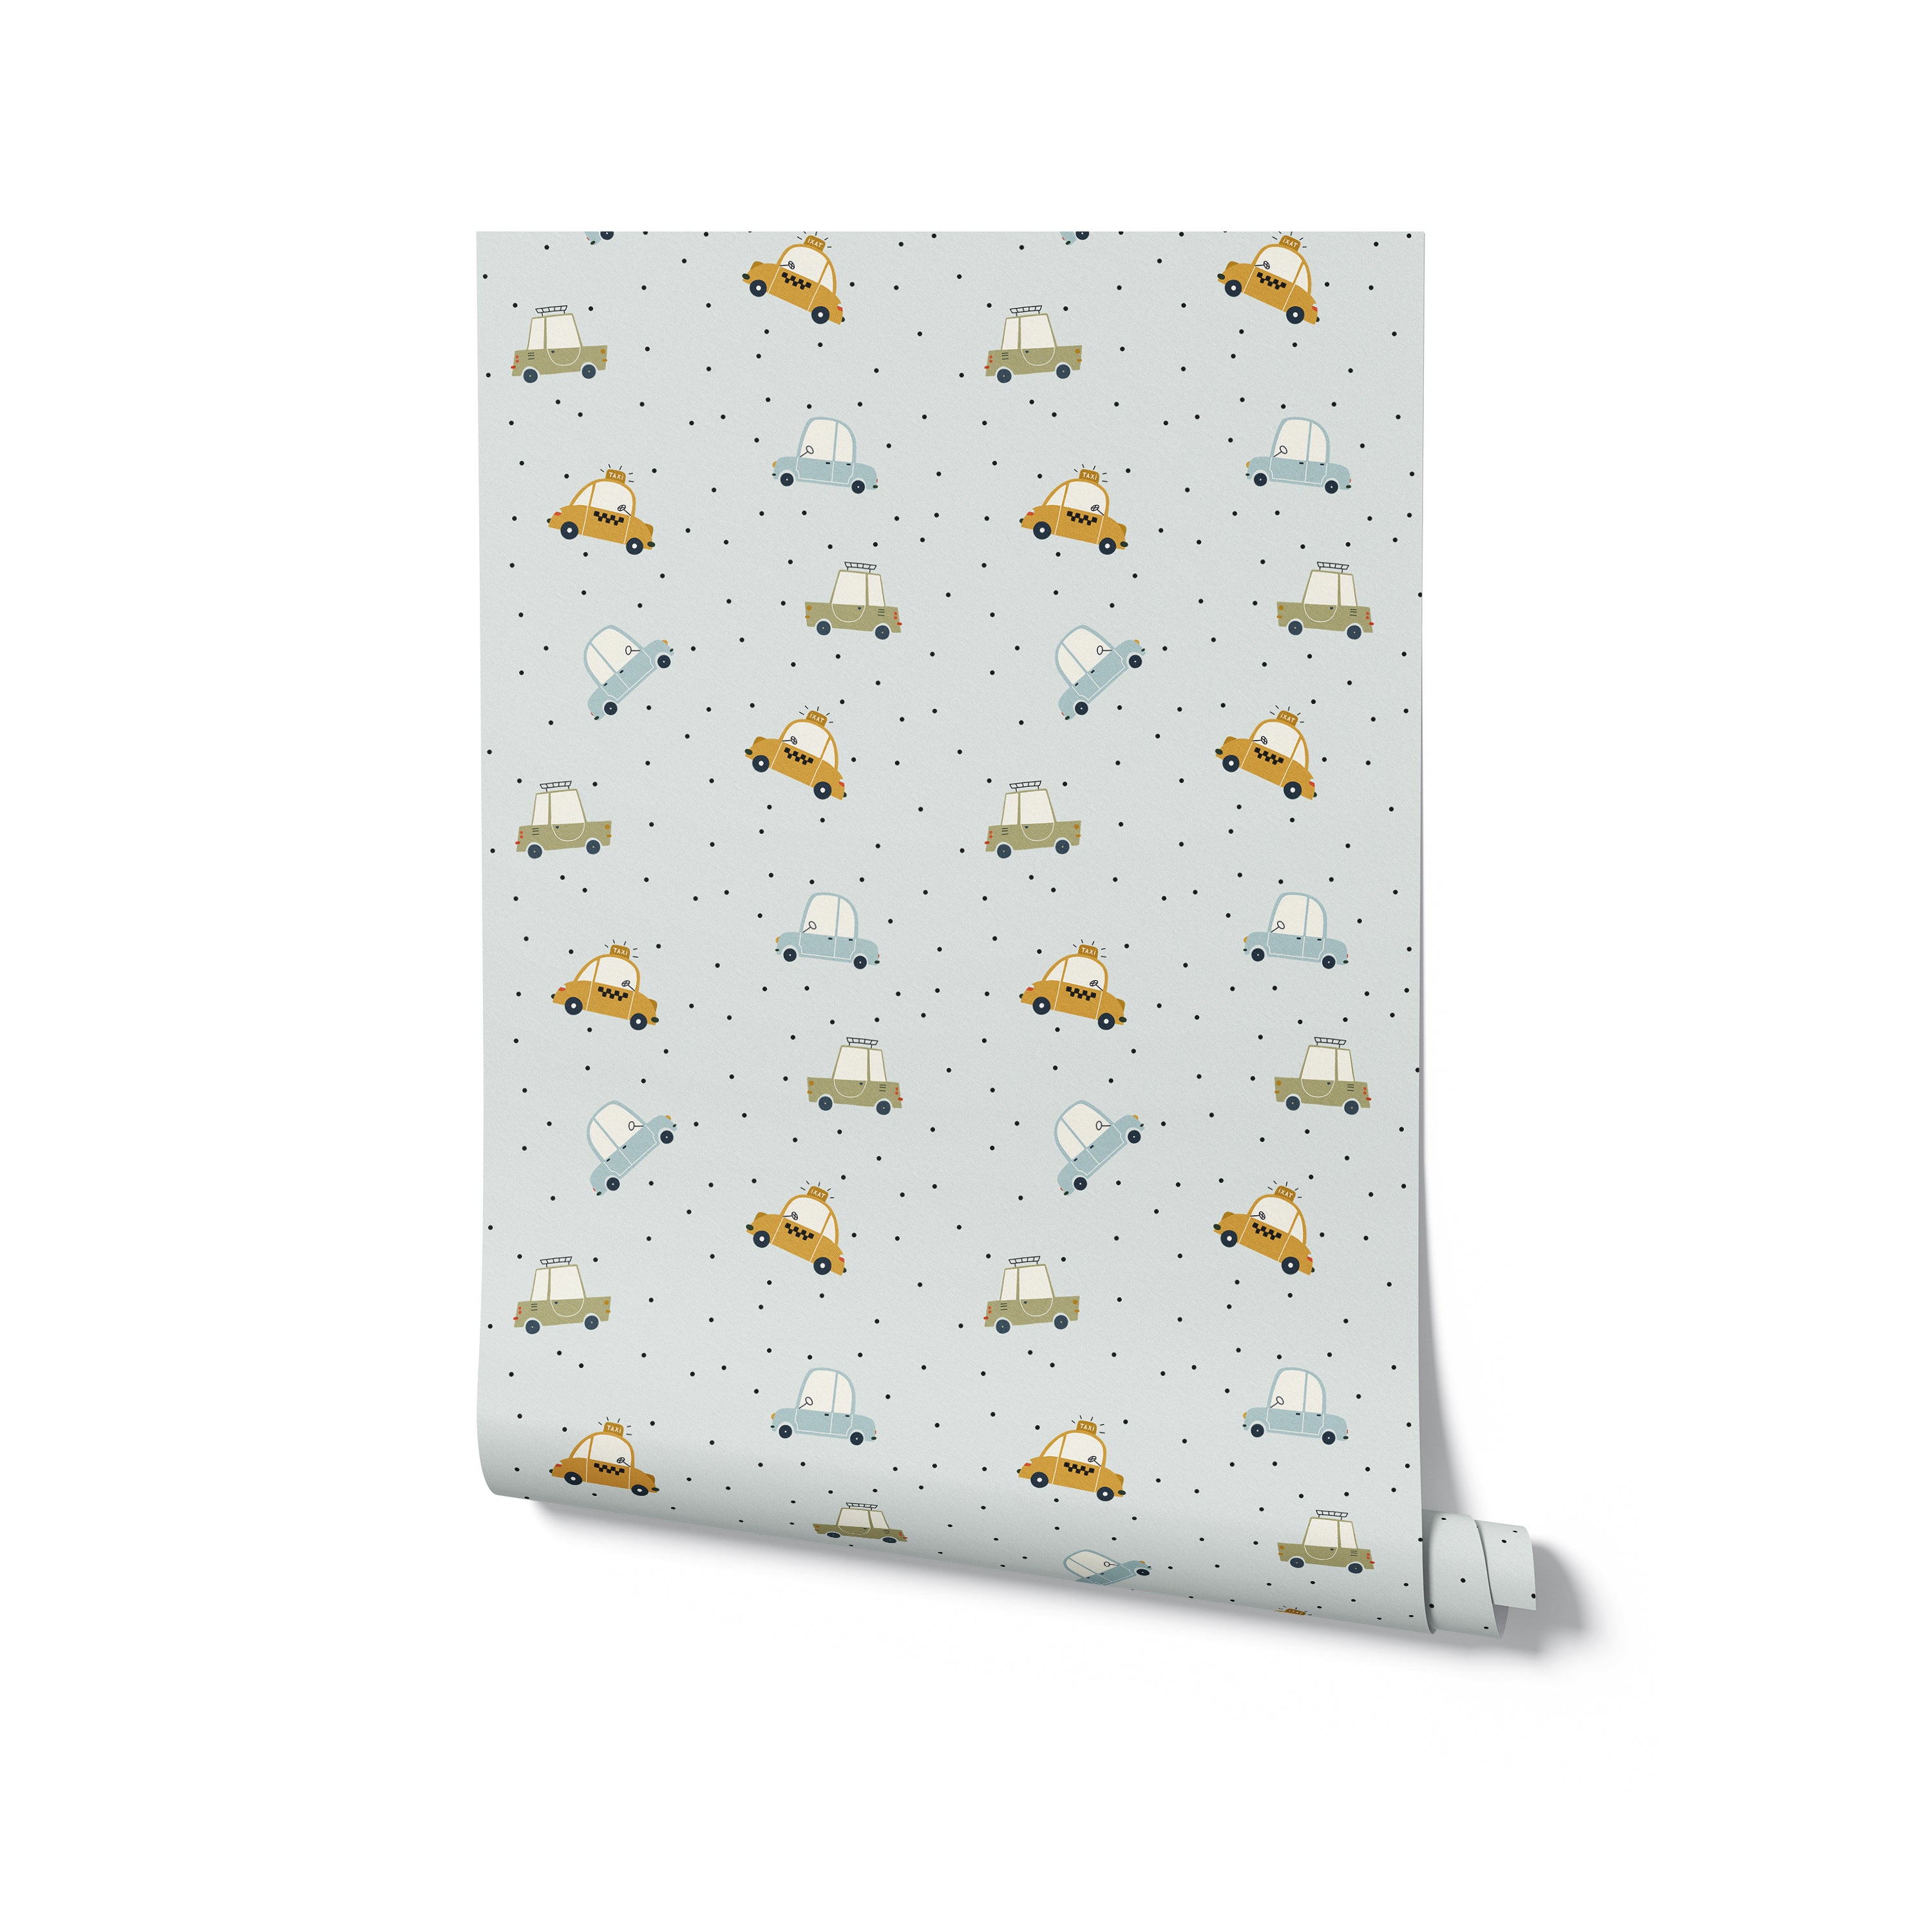 Rolled view of Cute Cars Wallpaper displaying a whimsical pattern of small cartoon cars in blue and yellow on a dotted light gray background. This adorable design is ideal for nurseries or playrooms, creating a lively and engaging atmosphere for children